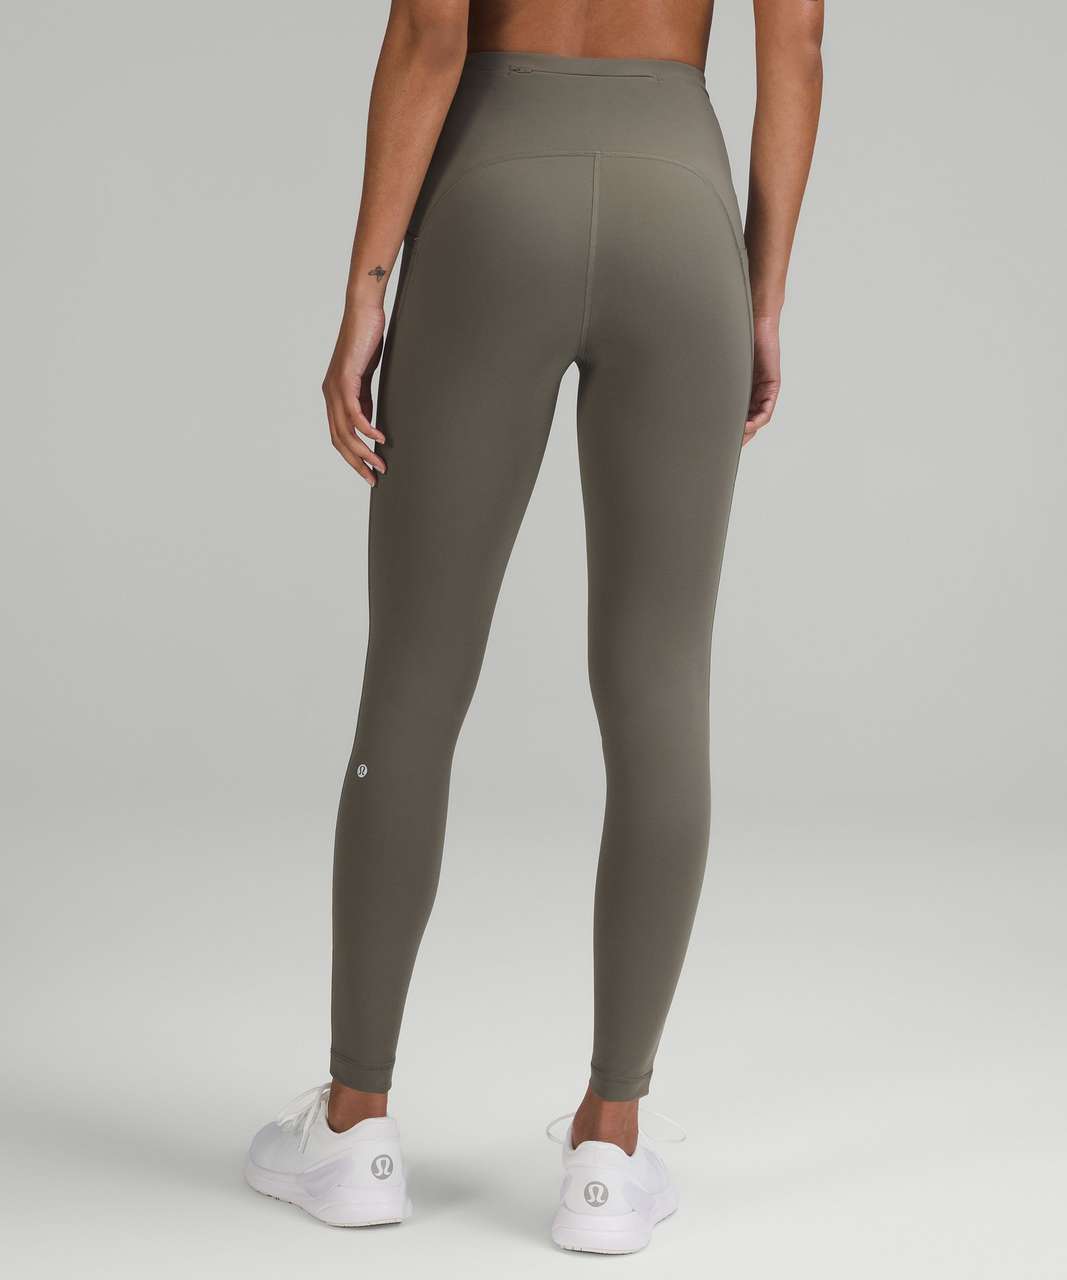 Lululemon athletica Swift Speed High-Rise Tight 28 *Brushed Luxtreme, Women's Leggings/Tights